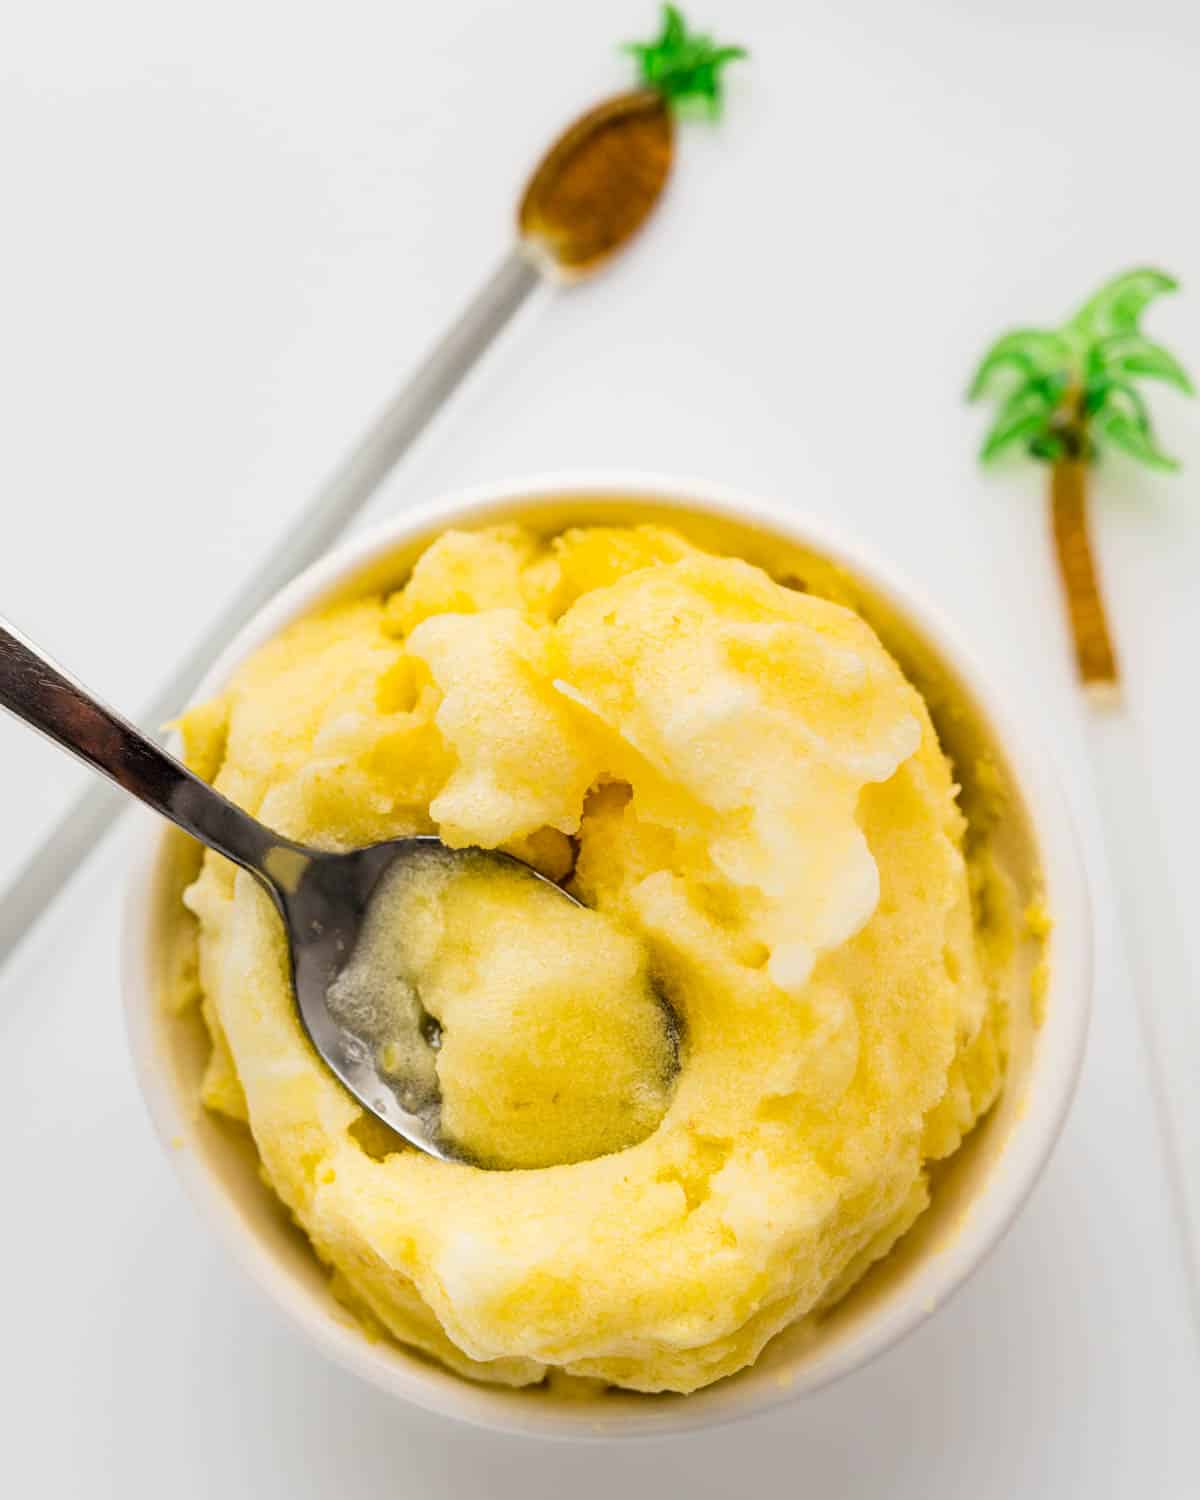 Spooning up the creamy pineapple sorbet from a bowl.